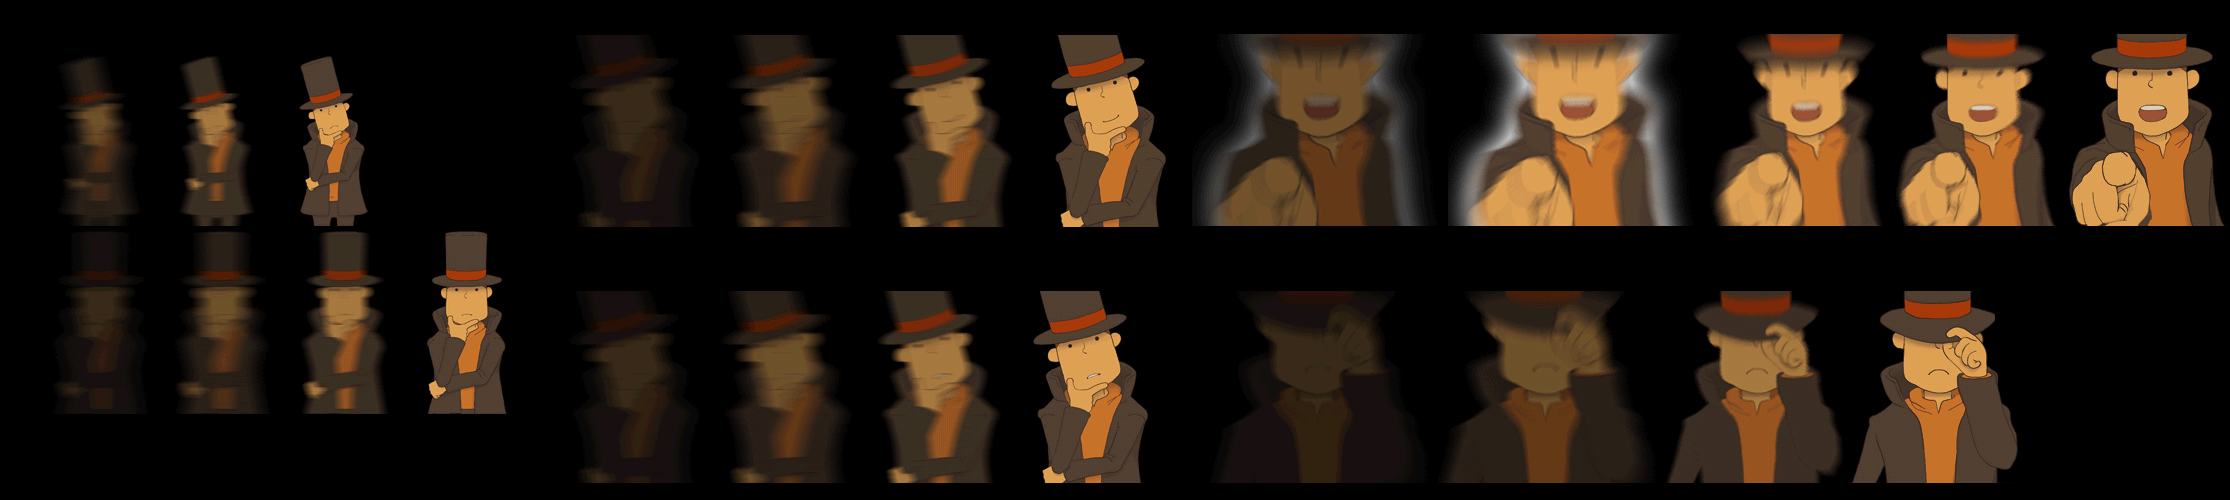 Professor Layton and the Unwound Future - Layton Puzzle Answers